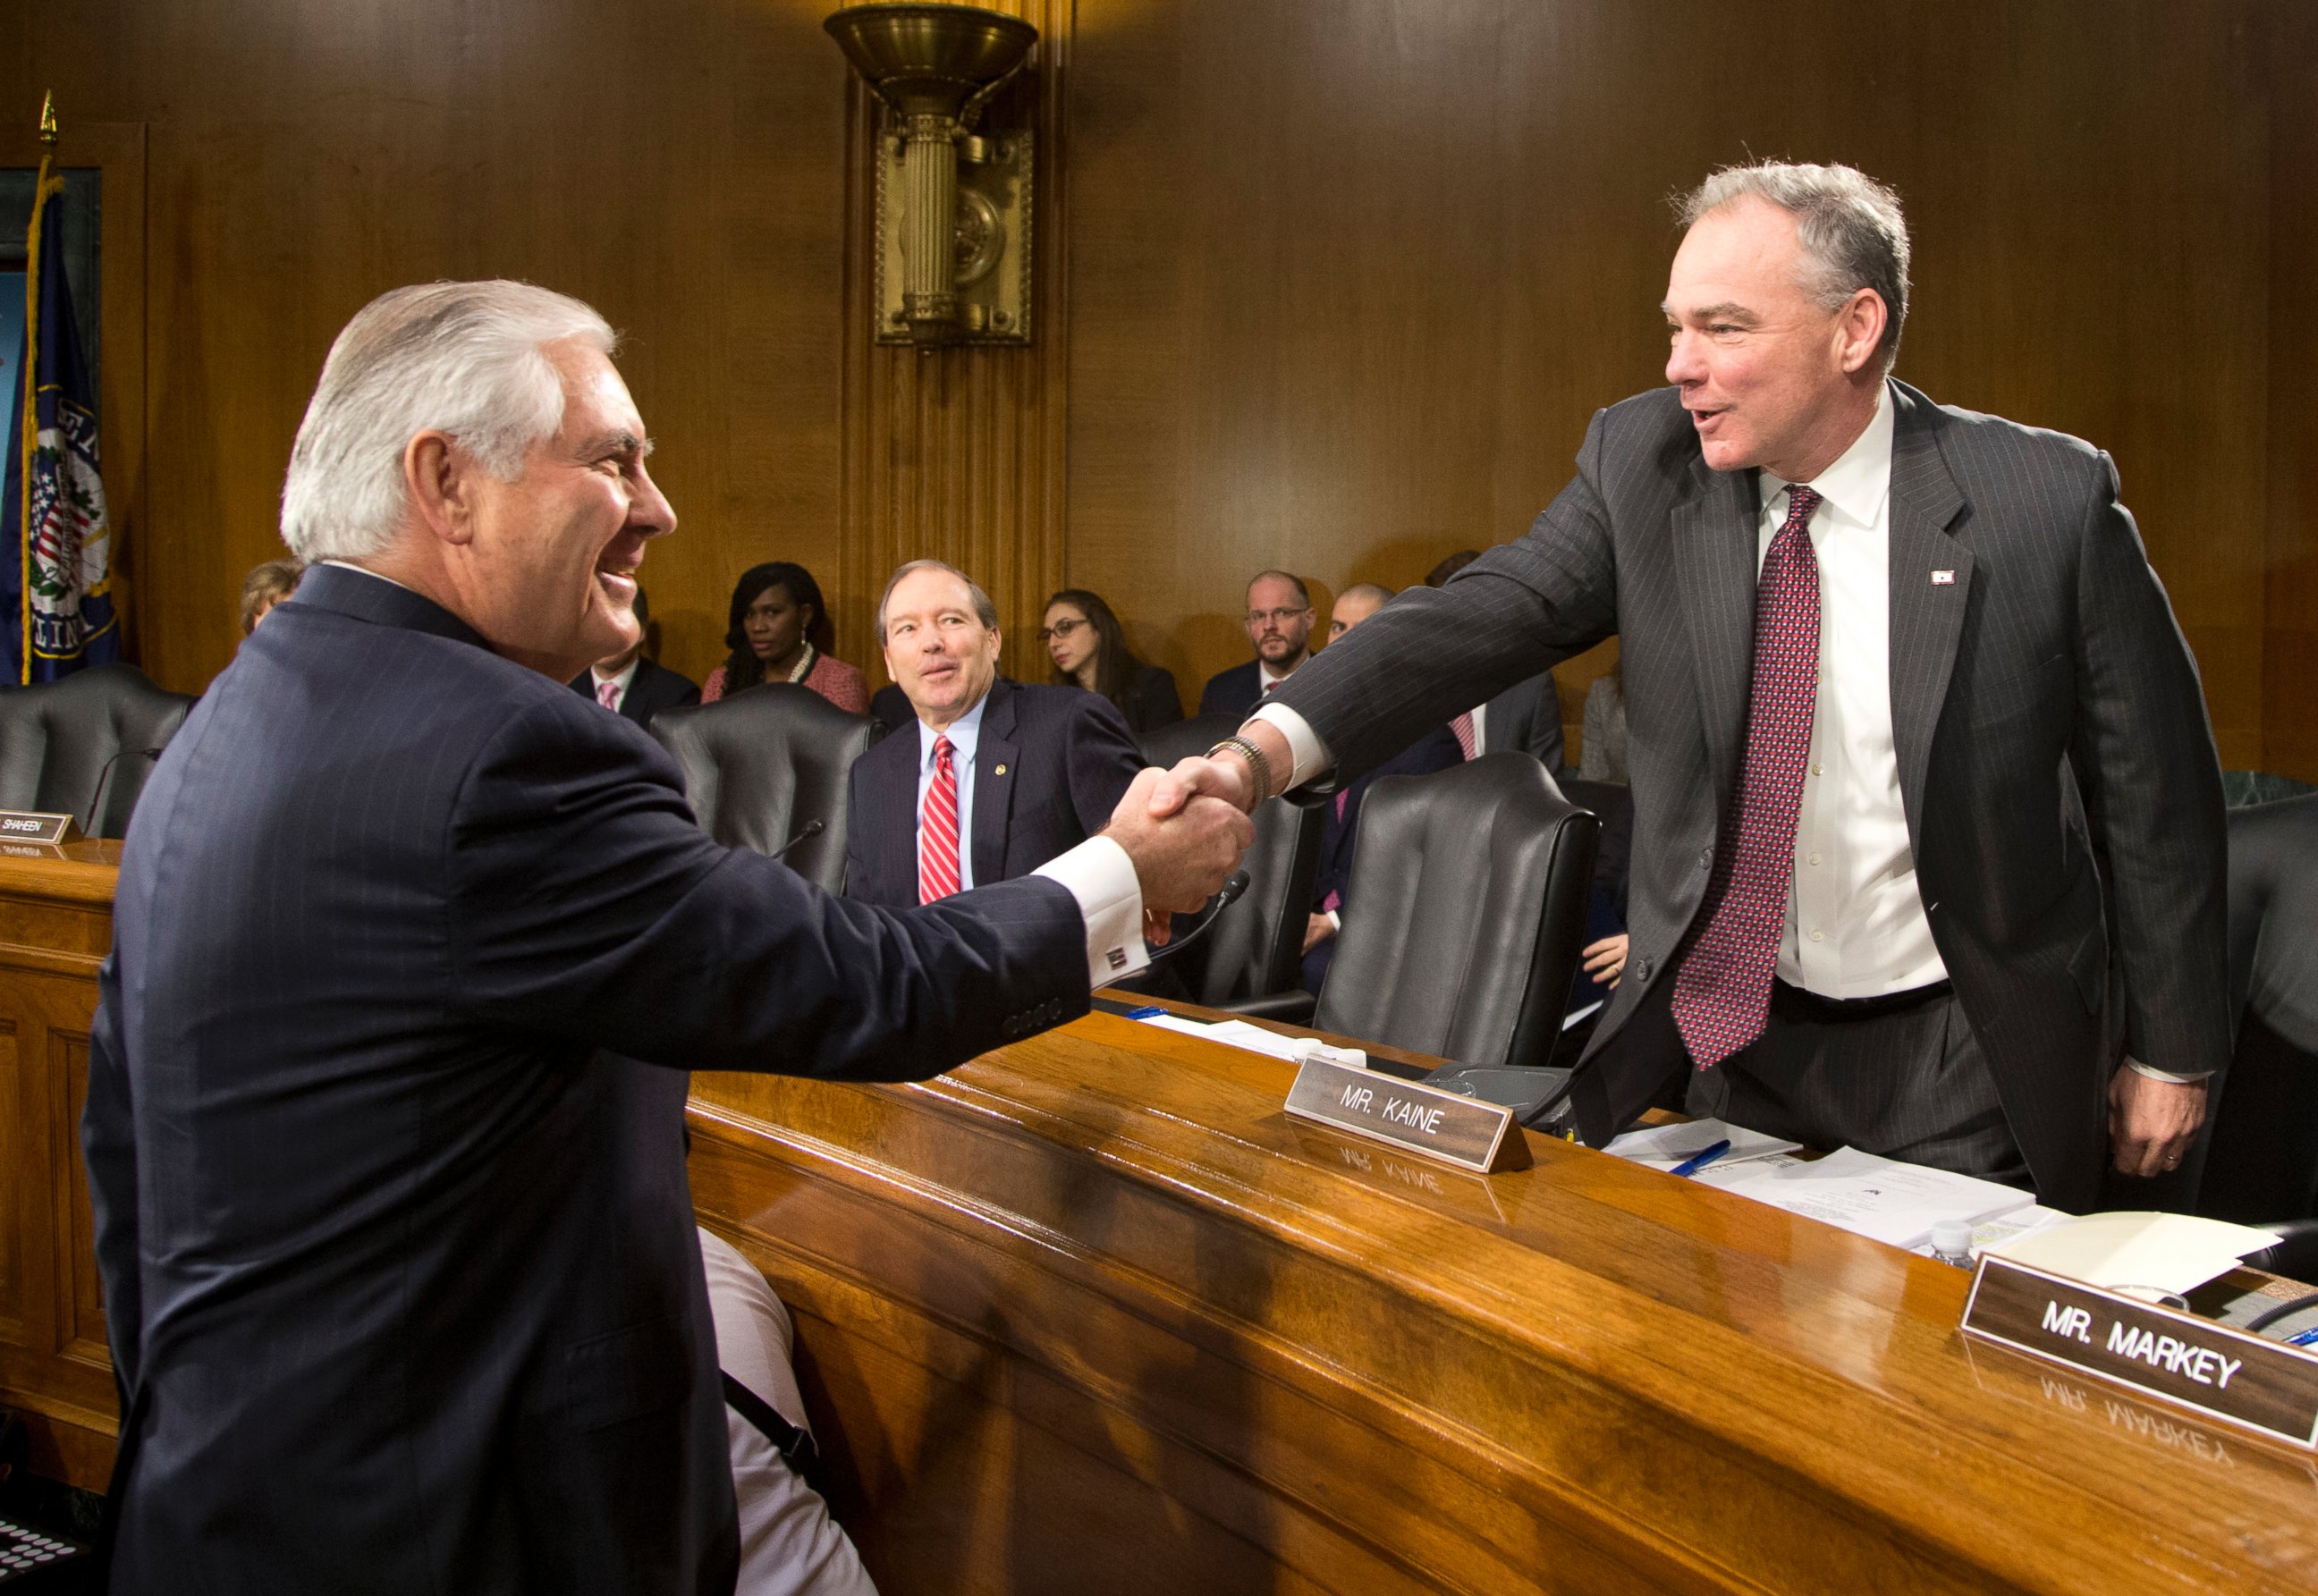 PHOTO: Senate Foreign Relations Committee member Sen. Tim Kaine, right, greets Secretary of State-designate Rex Tillerson on Capitol Hill in Washington, Jan. 11, 2017, prior to the start of Tillerson's confirmation hearing before the committee.